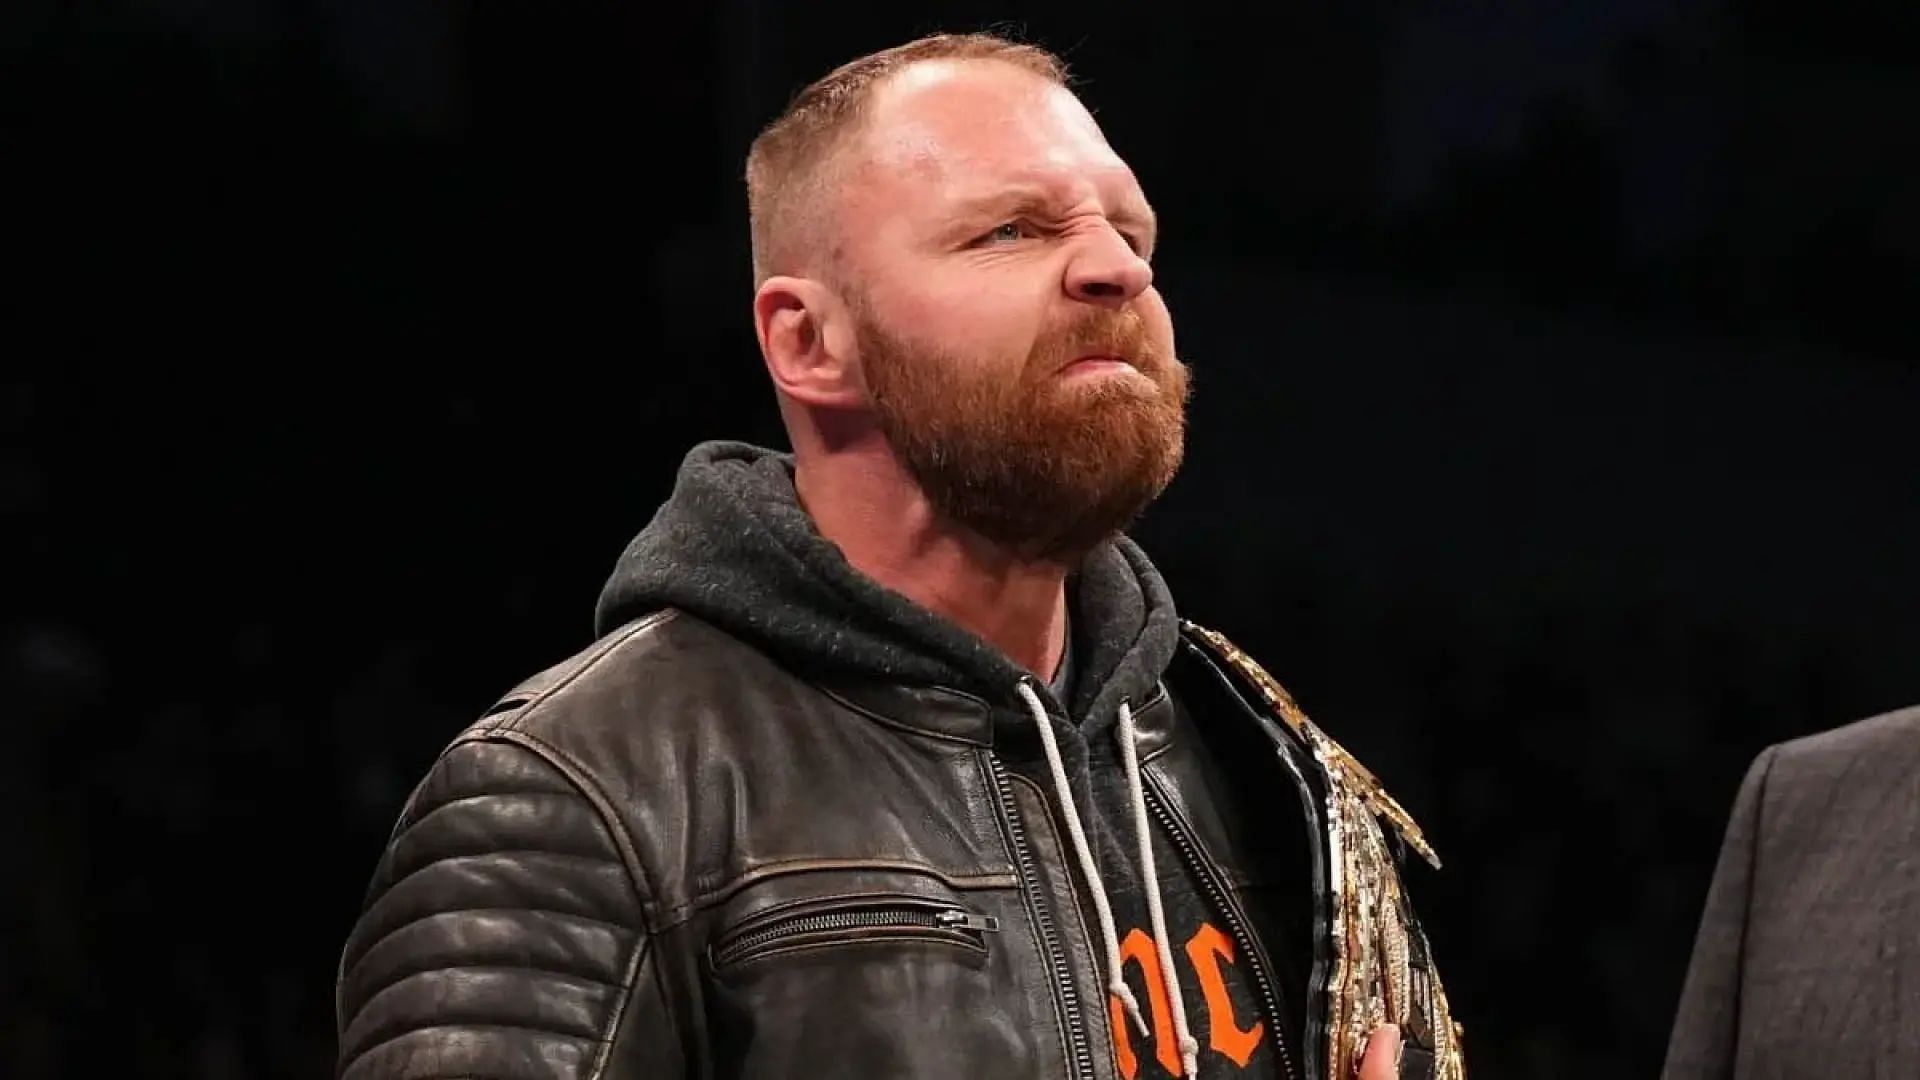 Jon Moxley is one of the biggest AEW stars